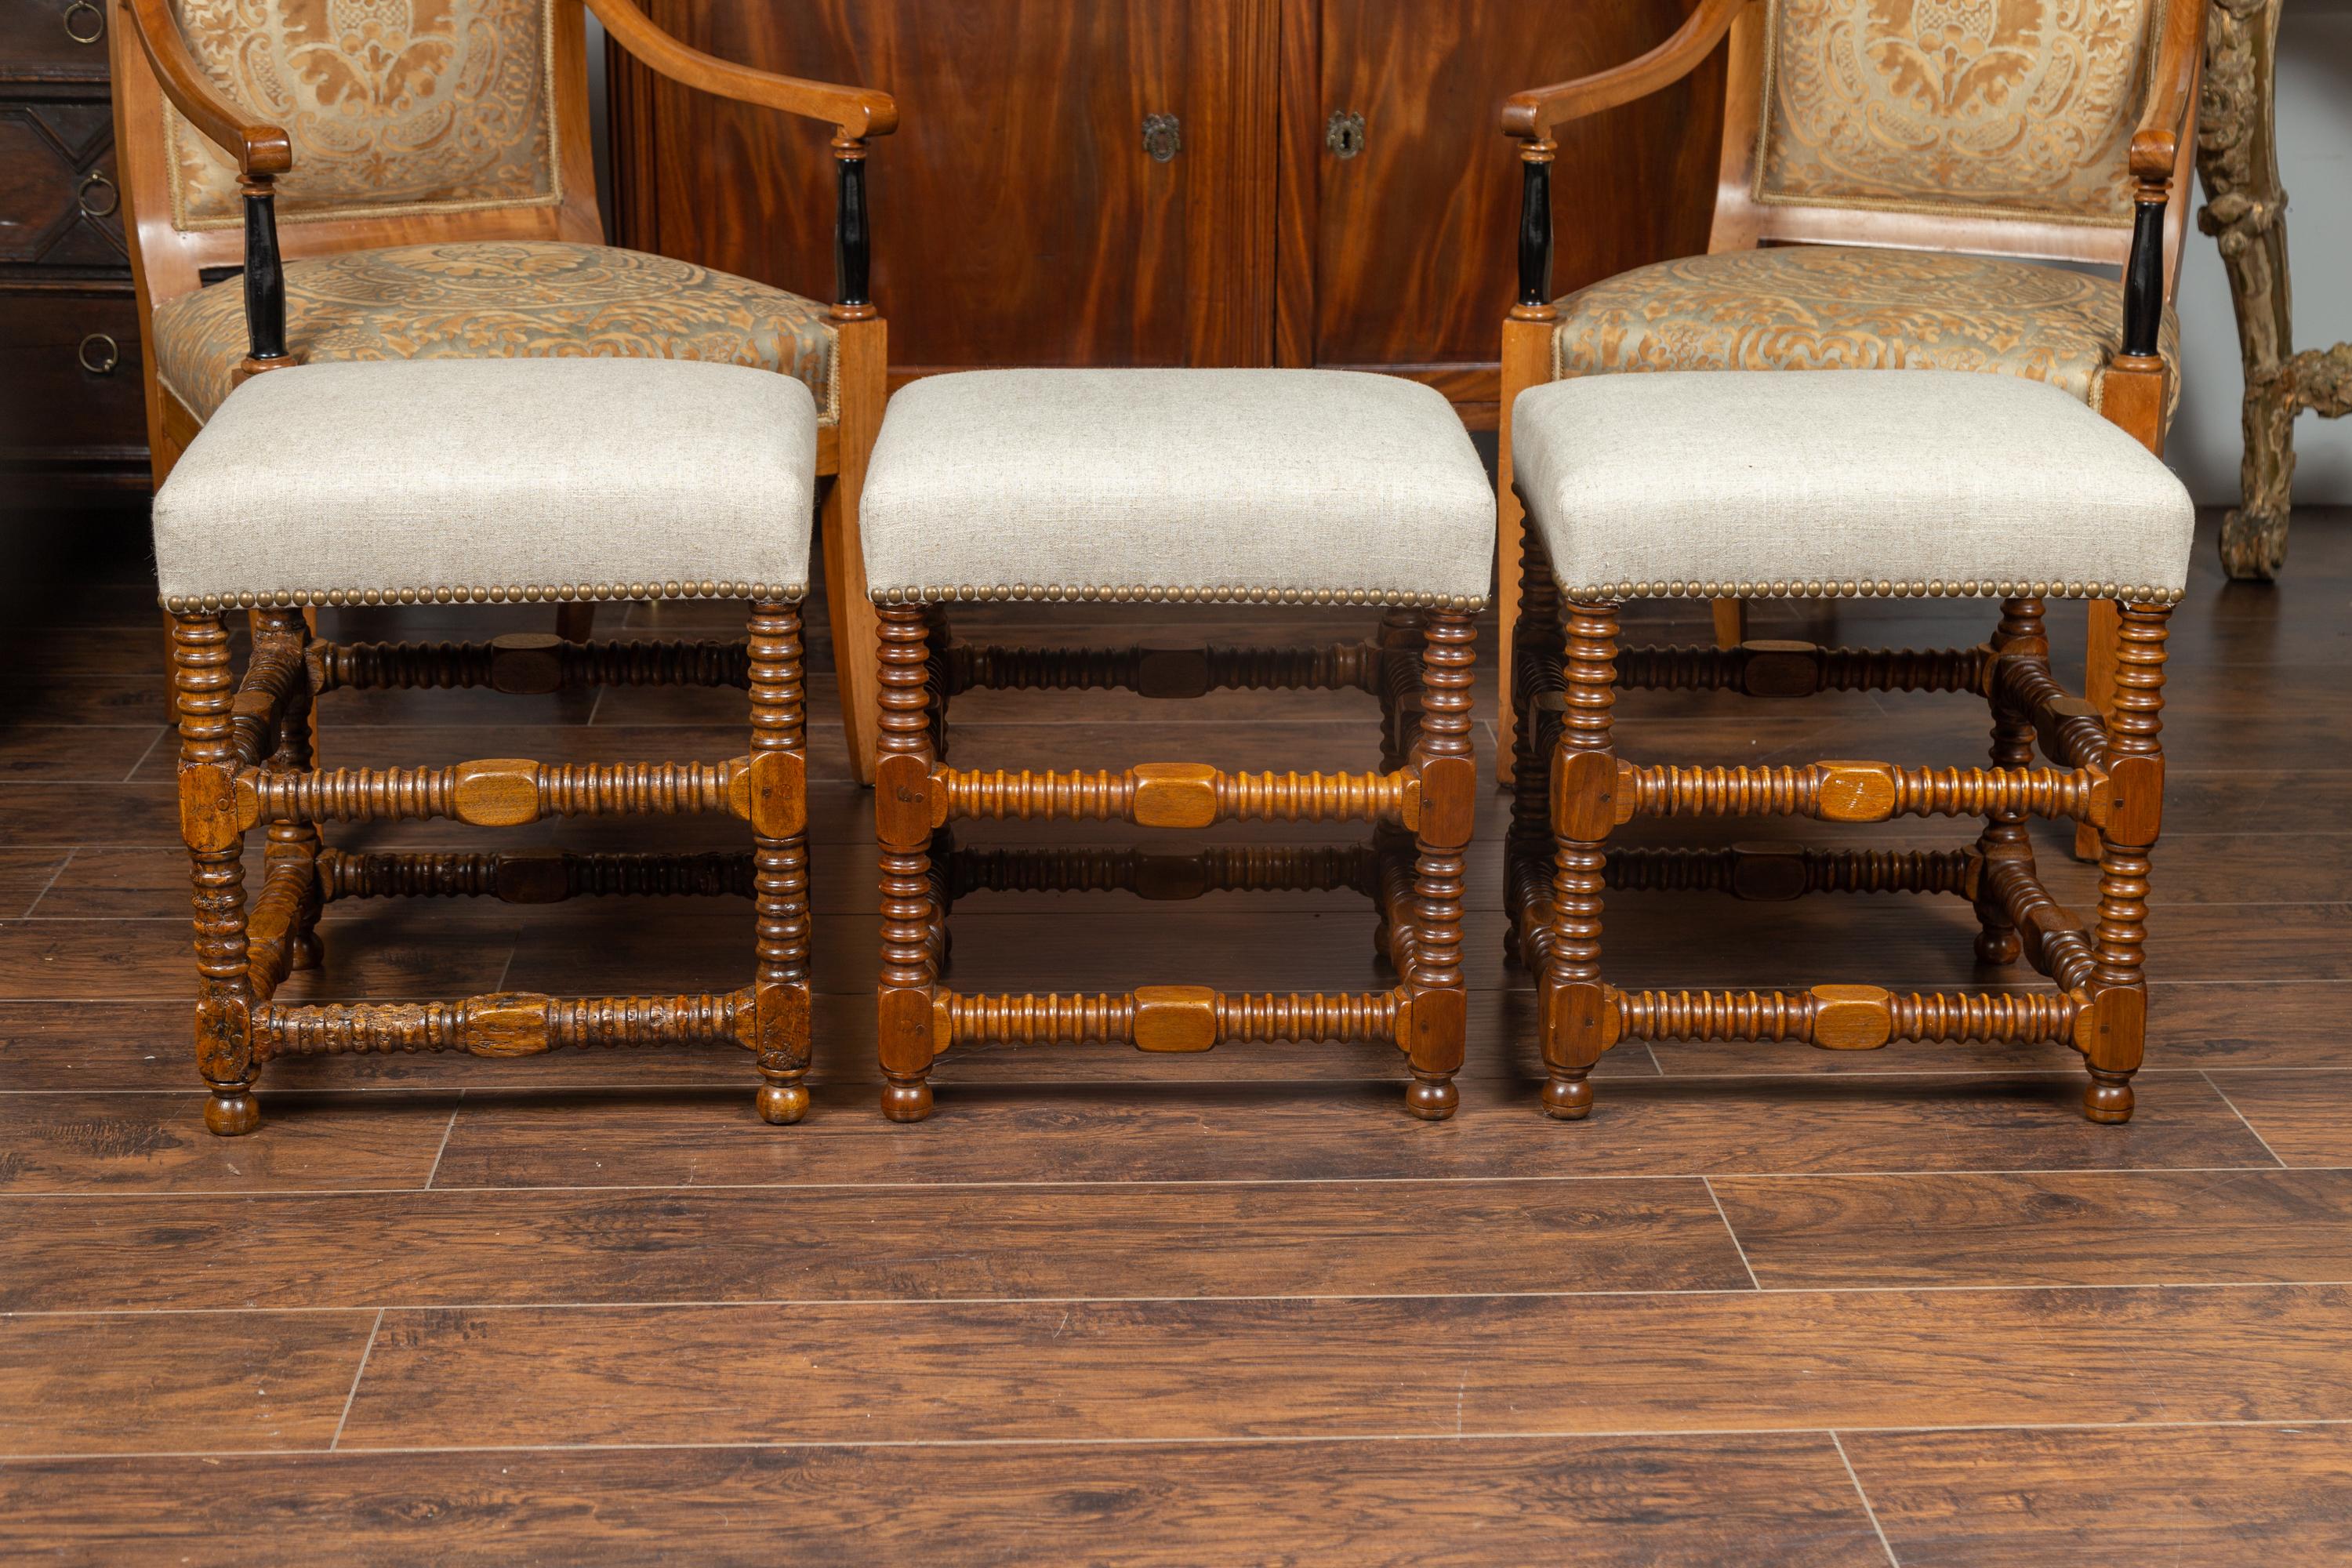 One Italian spool legs walnut stool is available. Born in Italy during the third quarter of the 19th century, it features a rectangular seat newly recovered with new linen upholstery accented with brass nailhead trim. Raised on four spool legs with